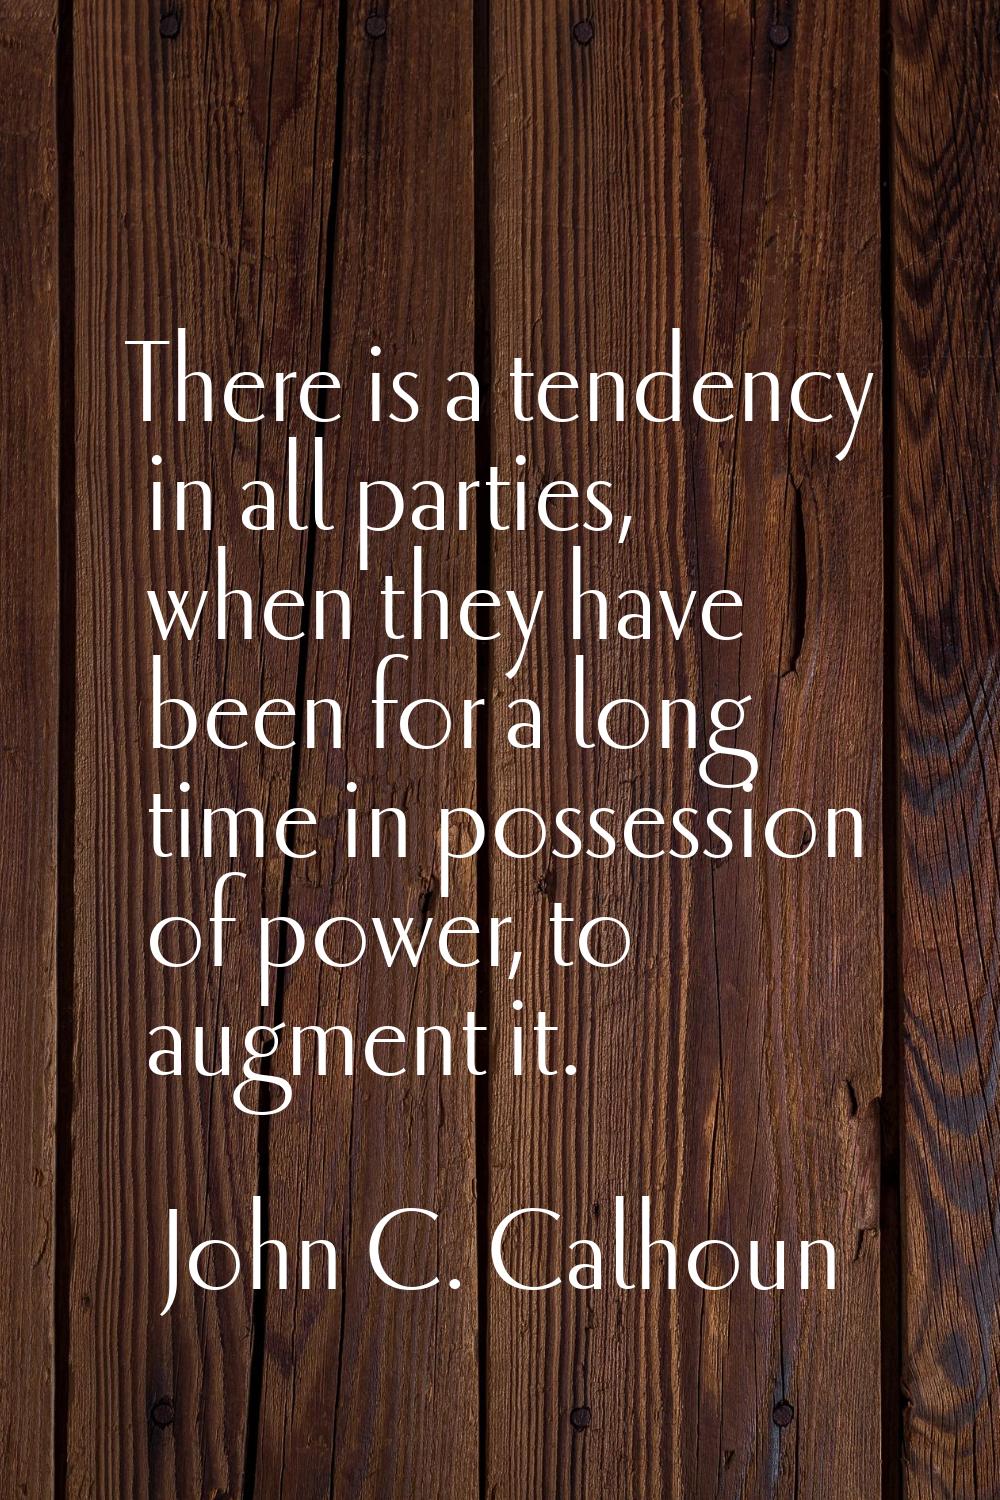 There is a tendency in all parties, when they have been for a long time in possession of power, to 